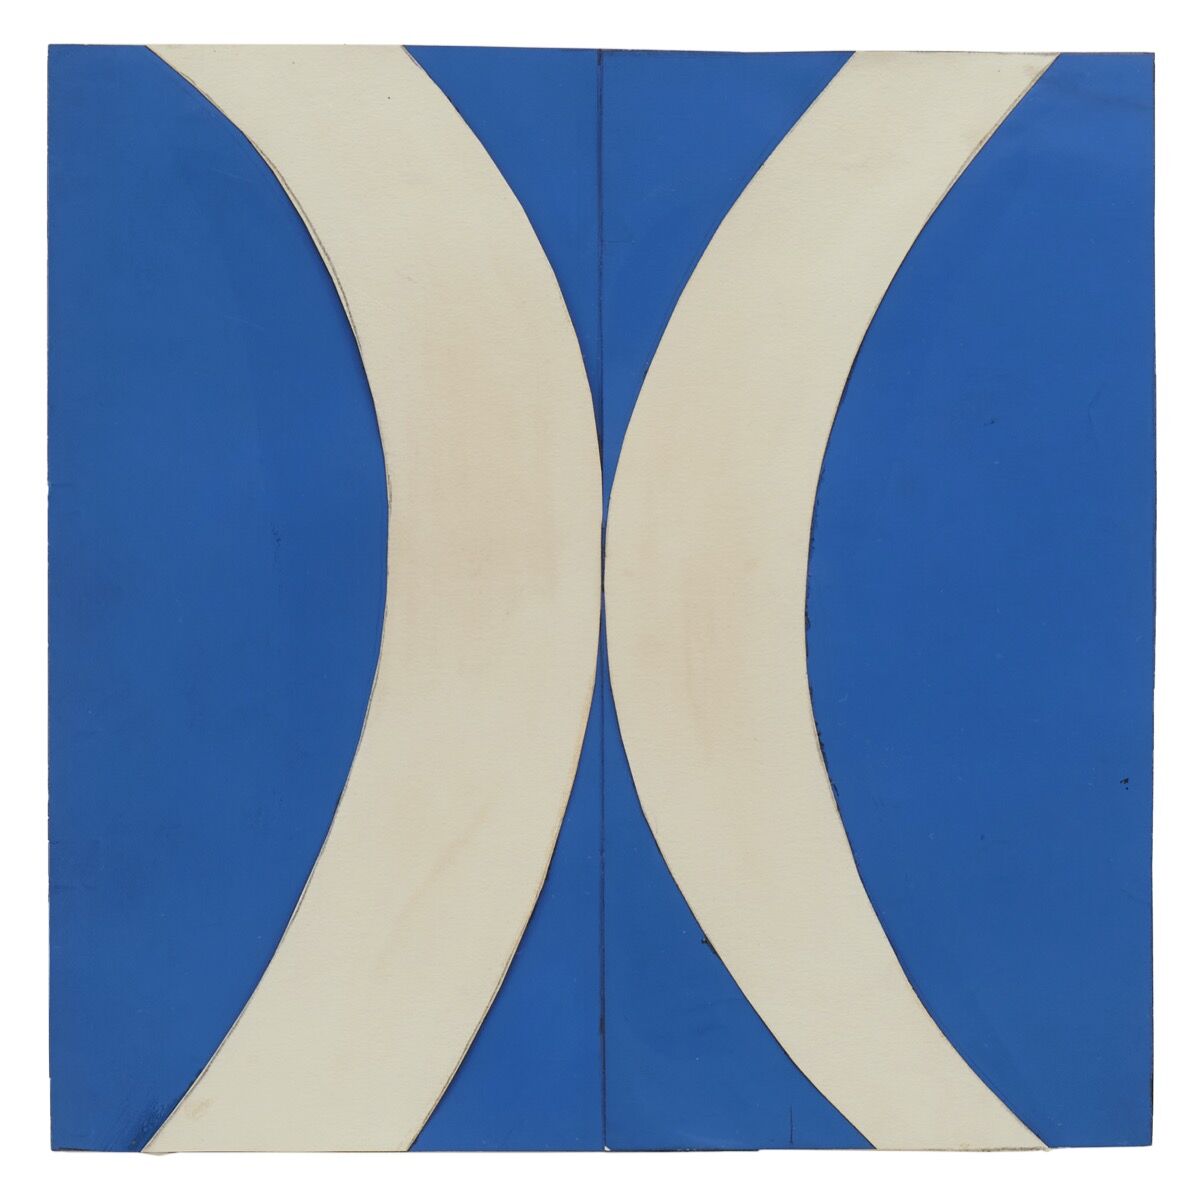 Ellsworth Kelly, White Forms on Blue, 1962. Courtesy of the artist and Matthew Marks Gallery.